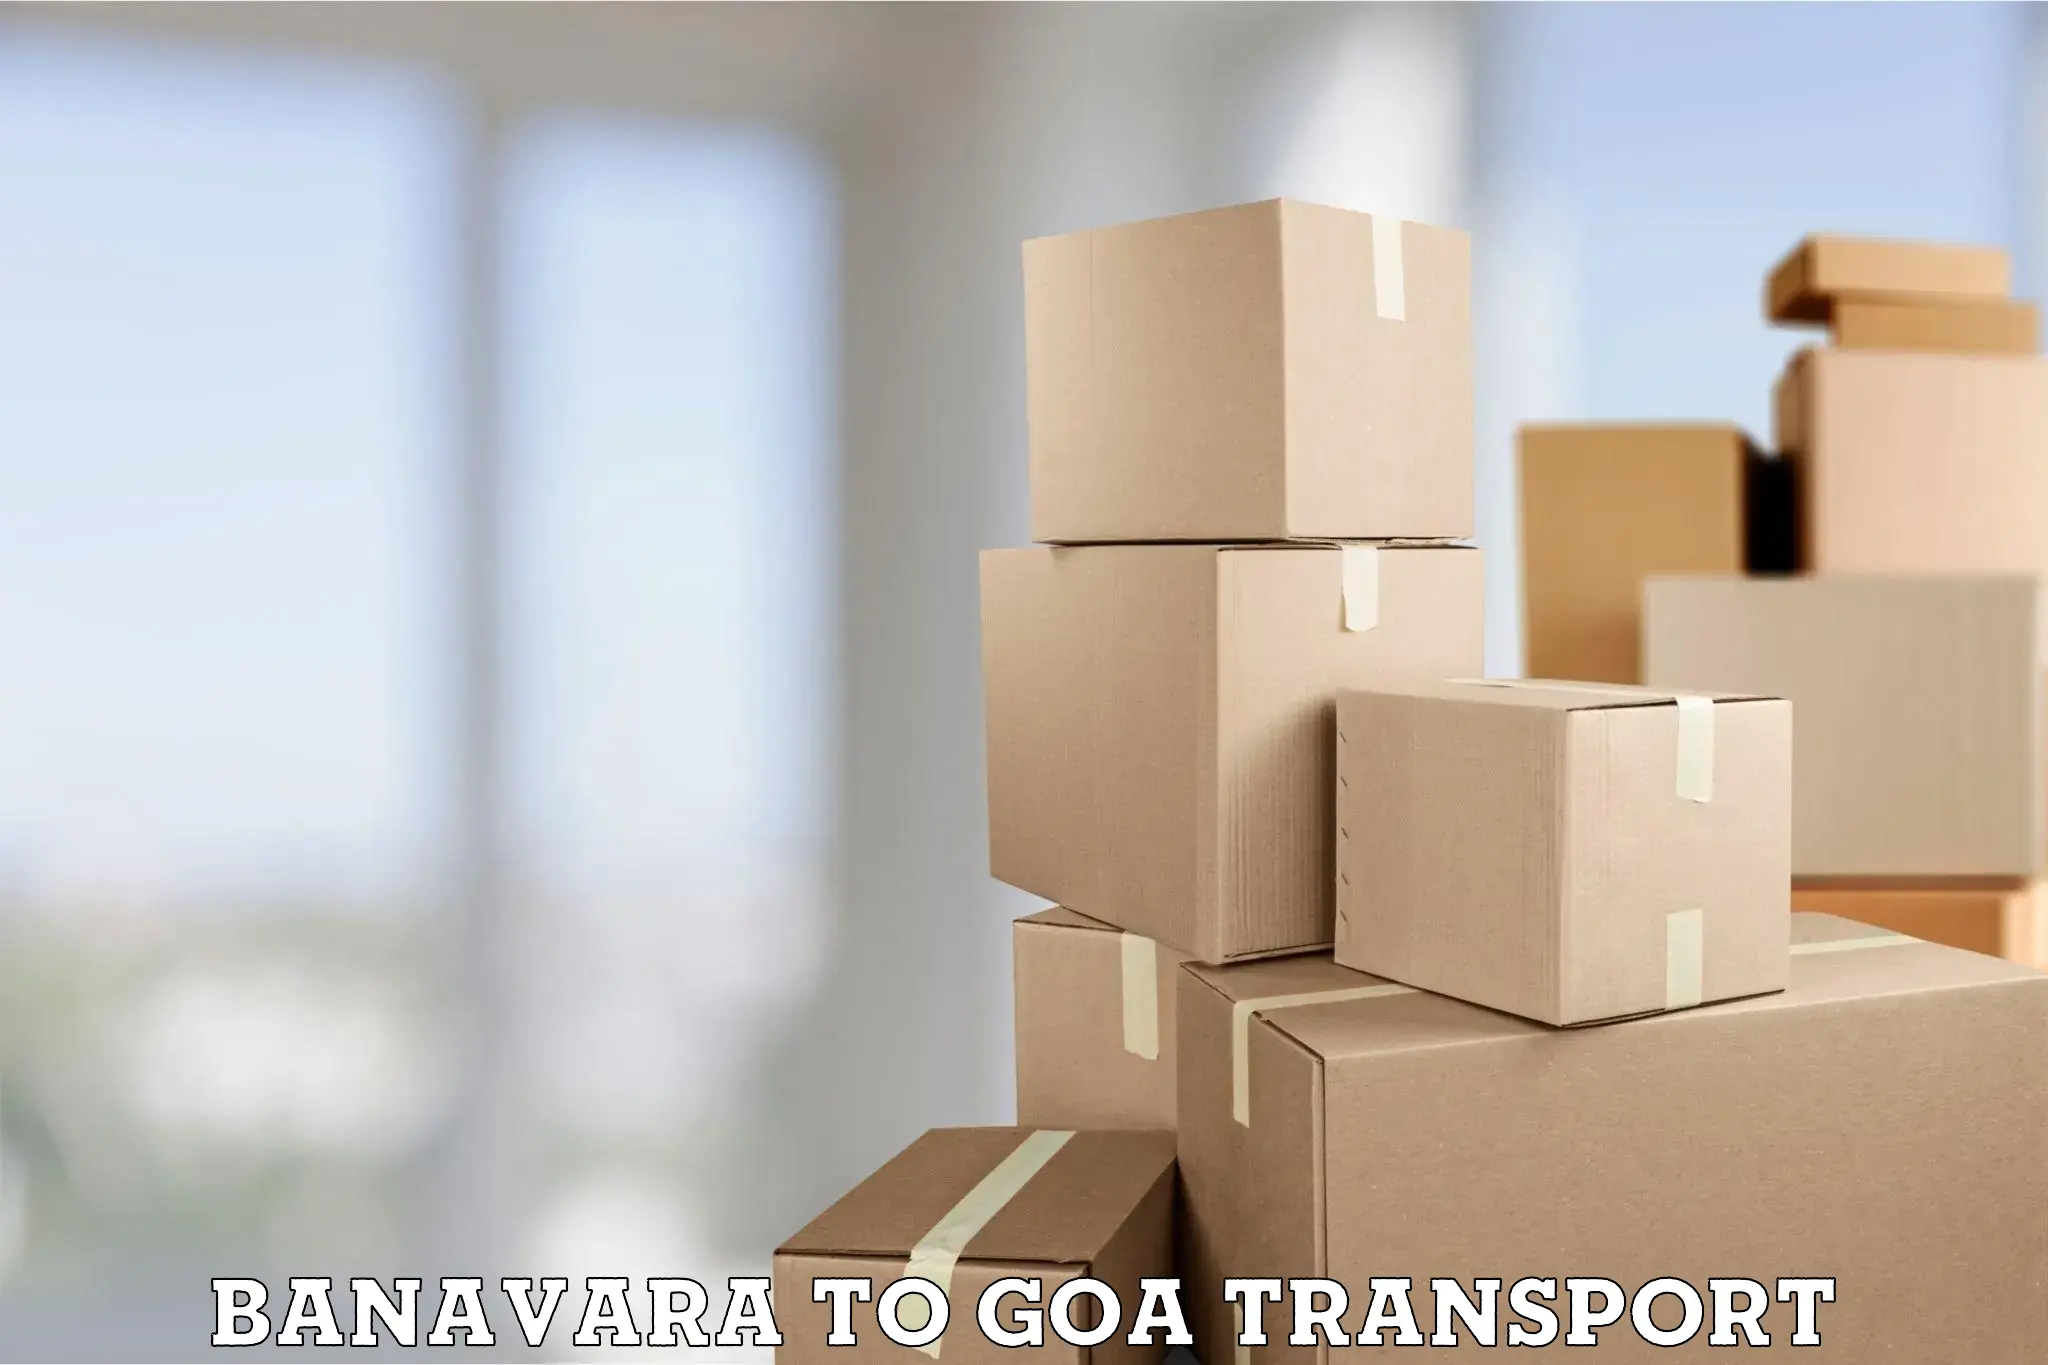 Transport bike from one state to another in Banavara to Mormugao Port